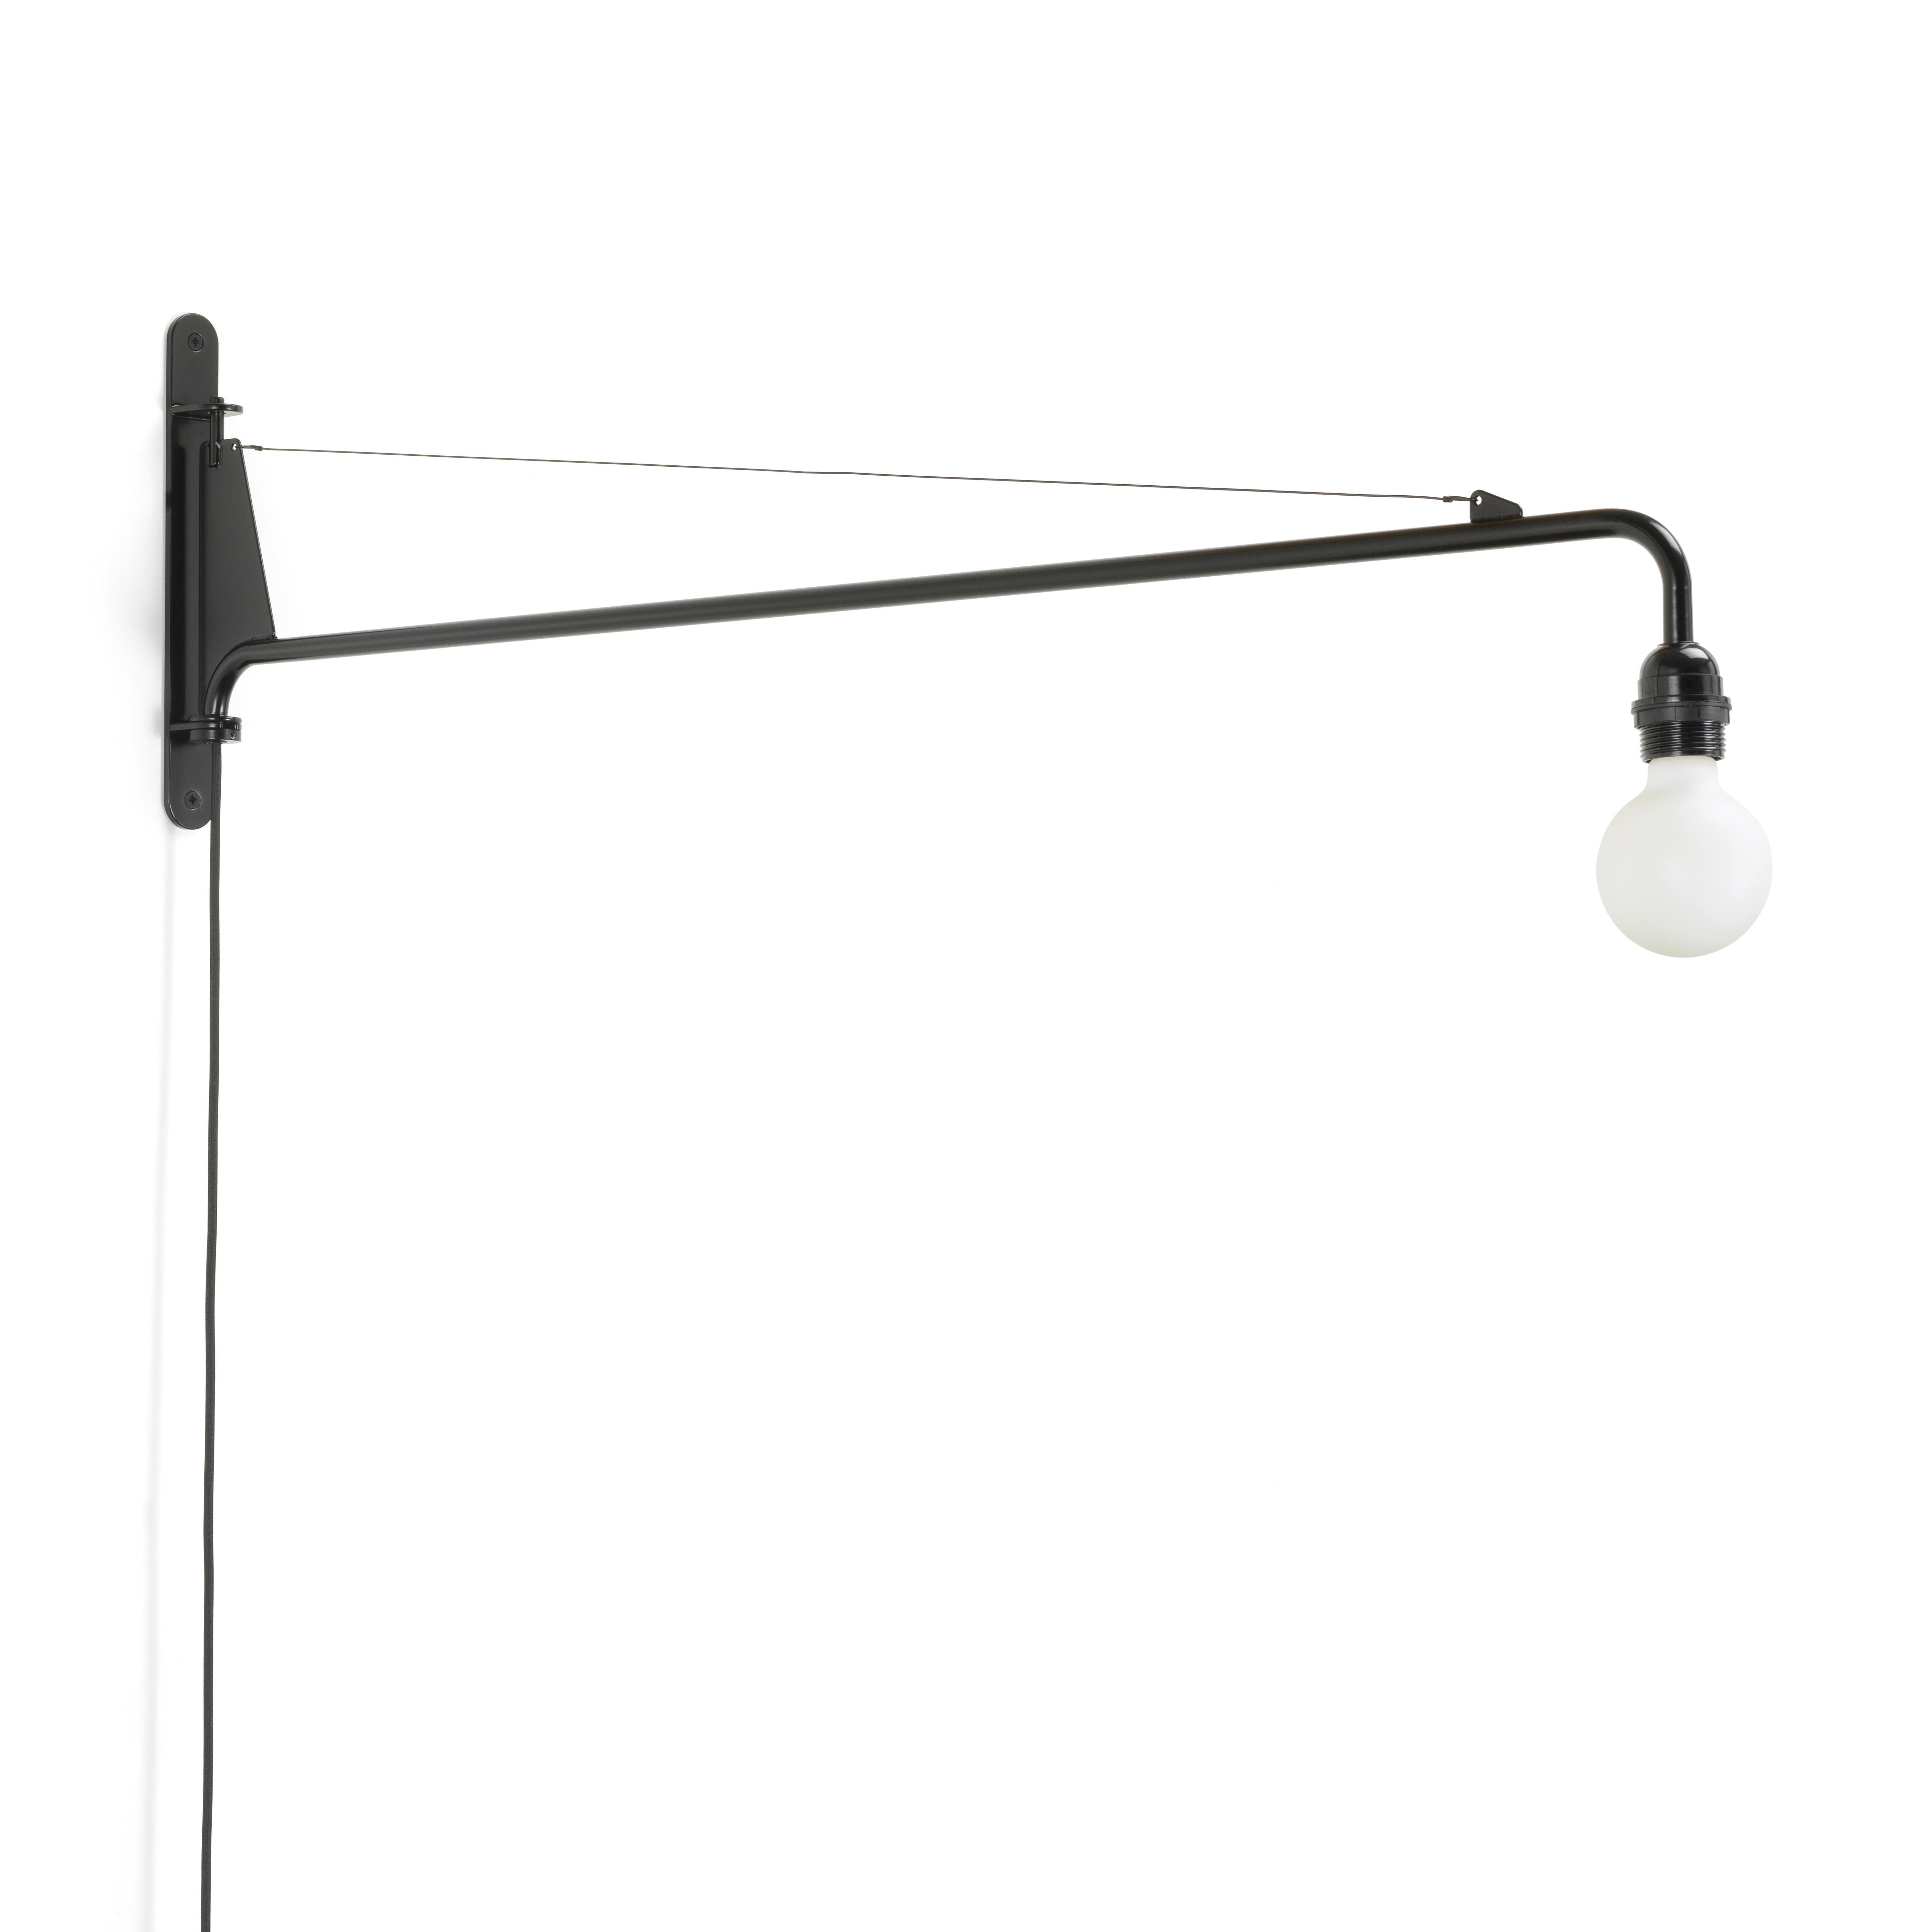 Jean Prouvé 'Petite Potence' Pivoting Wall Light in Black for Vitra In New Condition For Sale In Glendale, CA